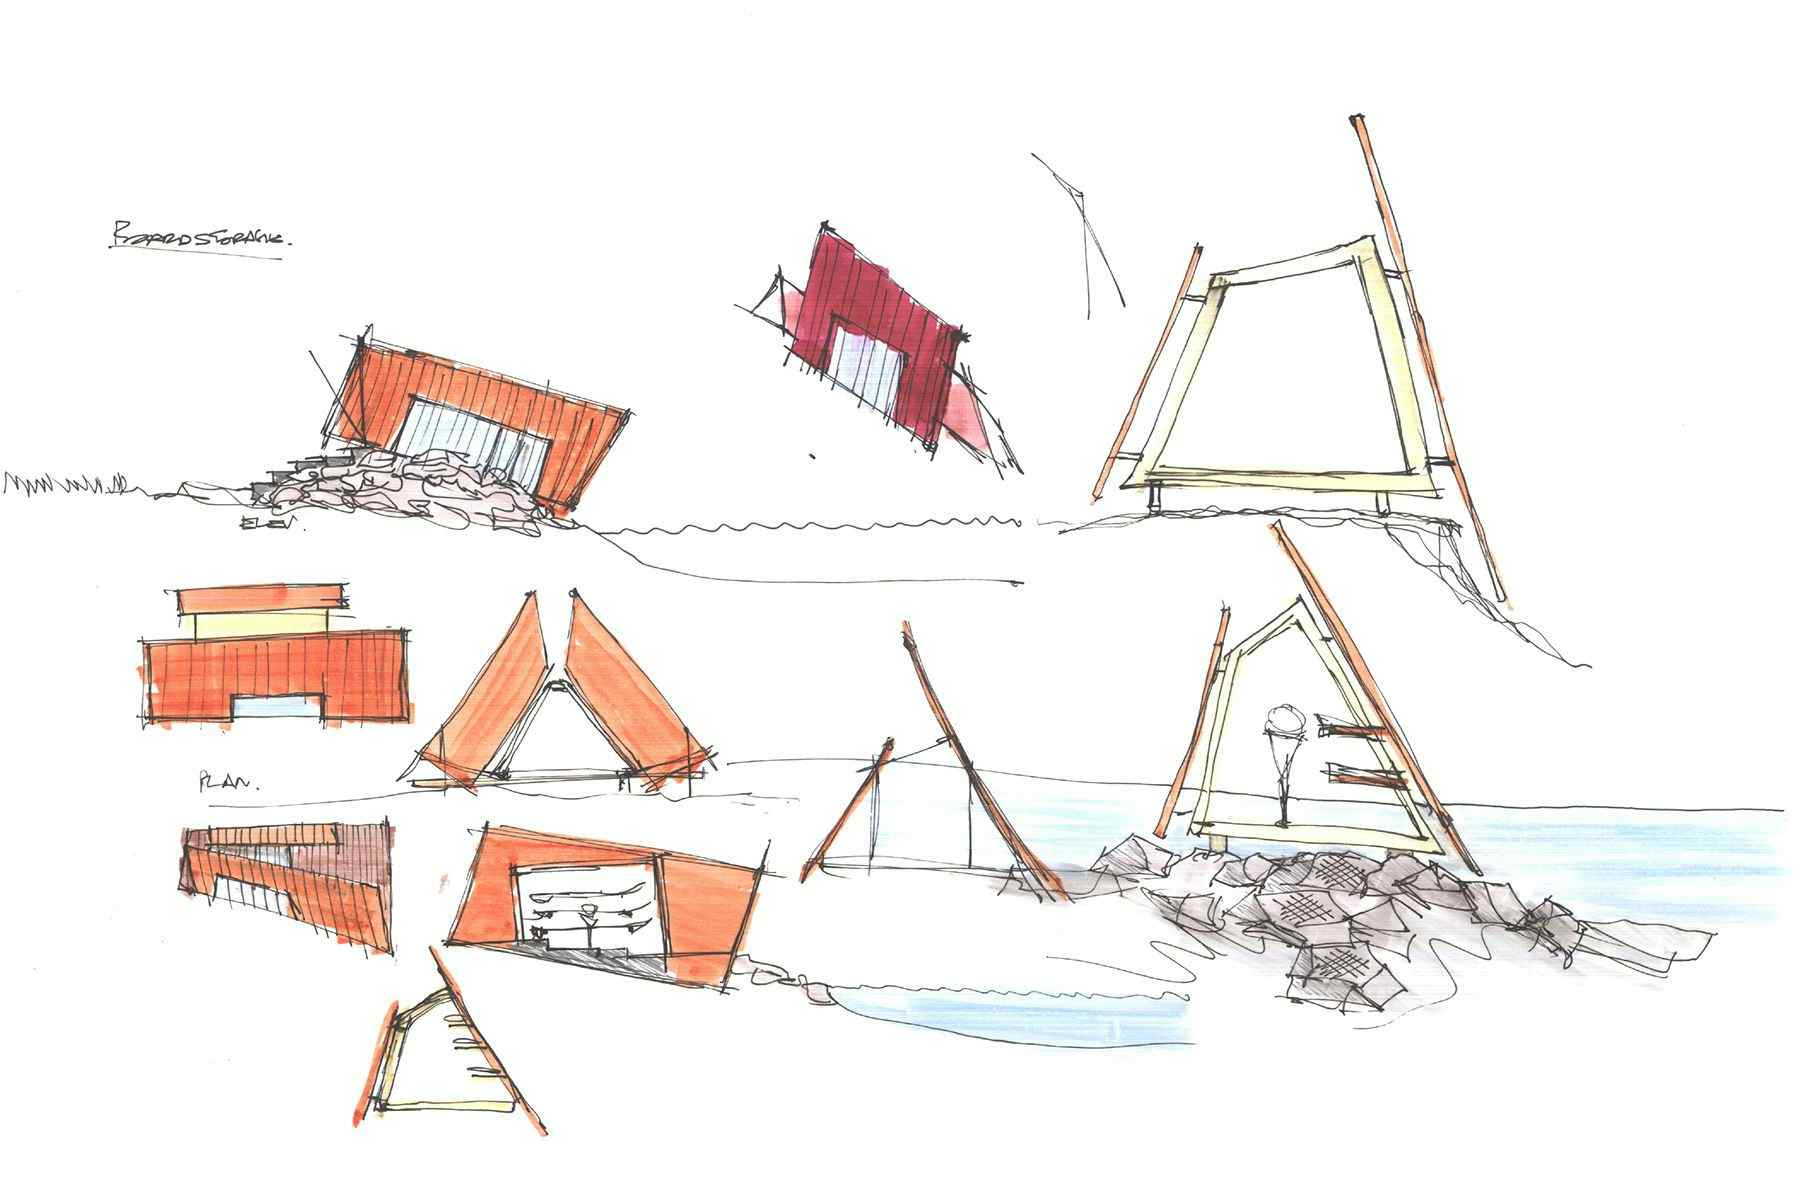 concept sketches for a surfboard storage and surf check structure by john fache